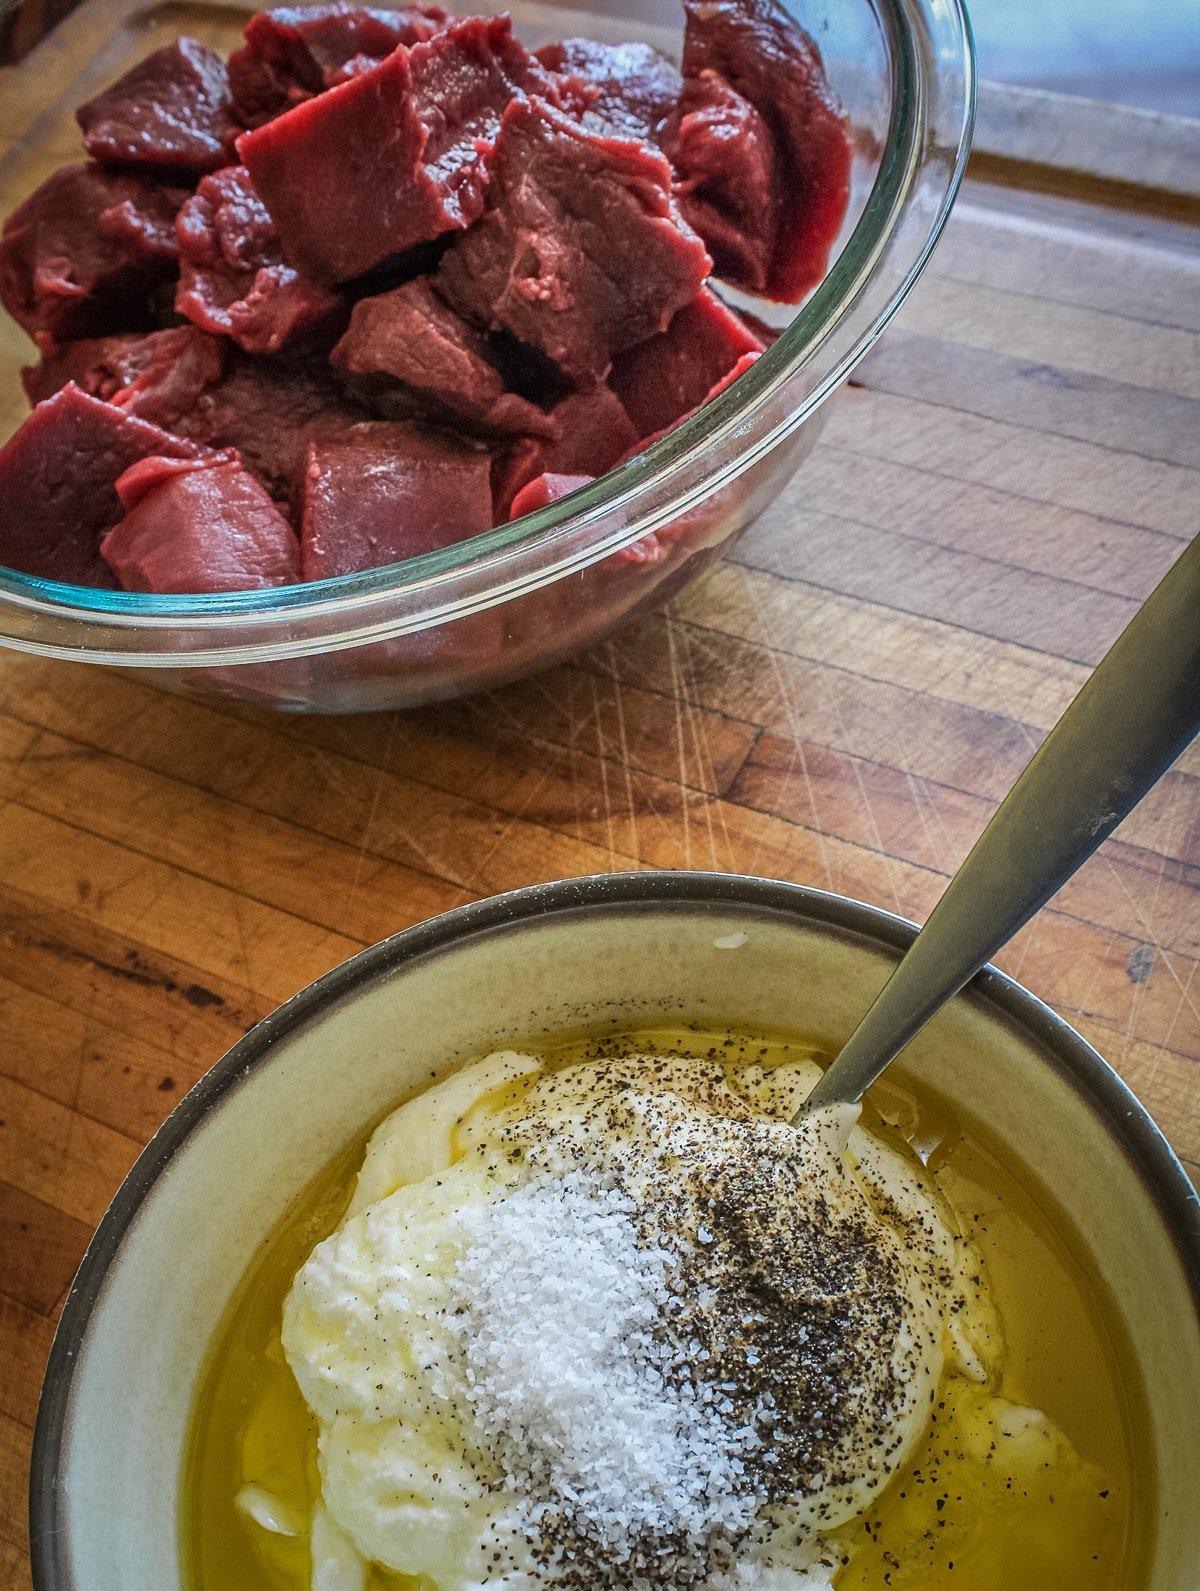 Mix the yogurt based marinade and pour over the venison cubes.